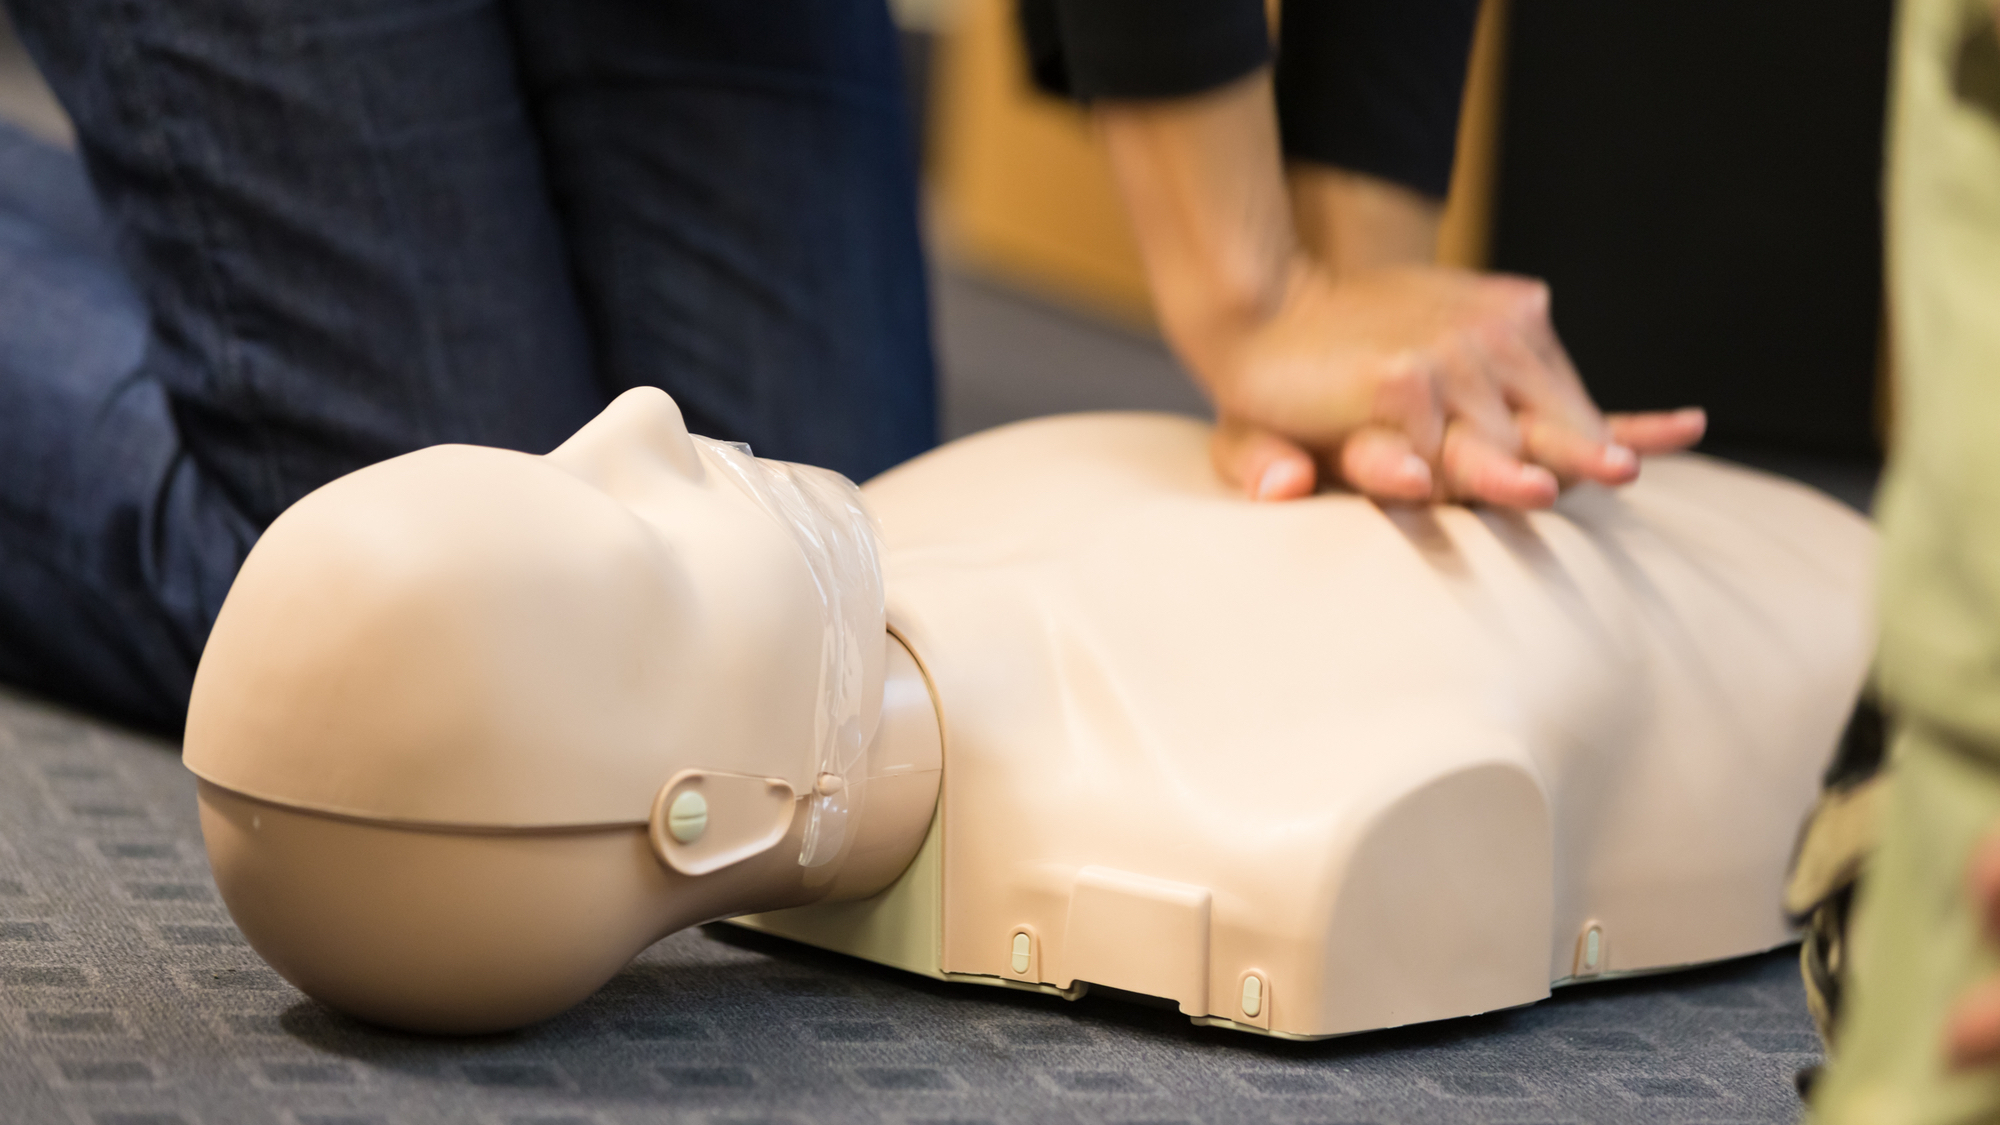 Hands giving CPR to mannequin